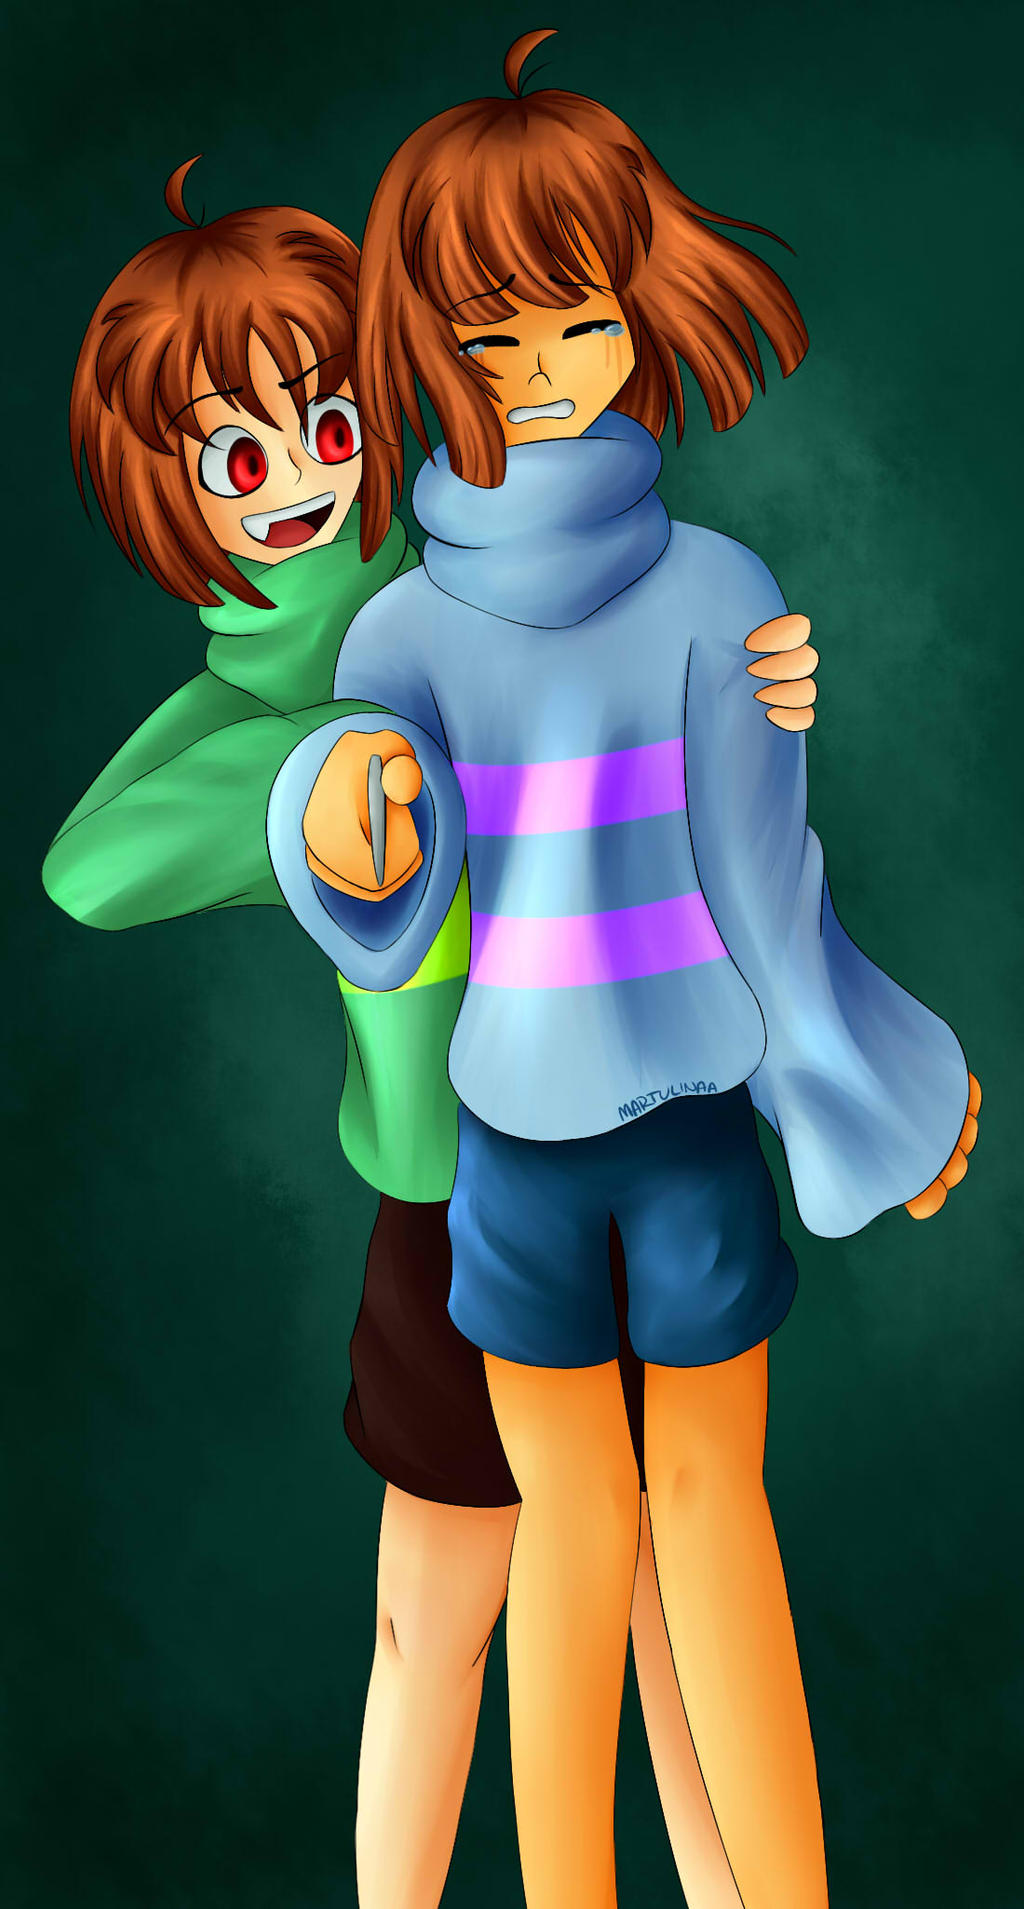 Chara and Frisk